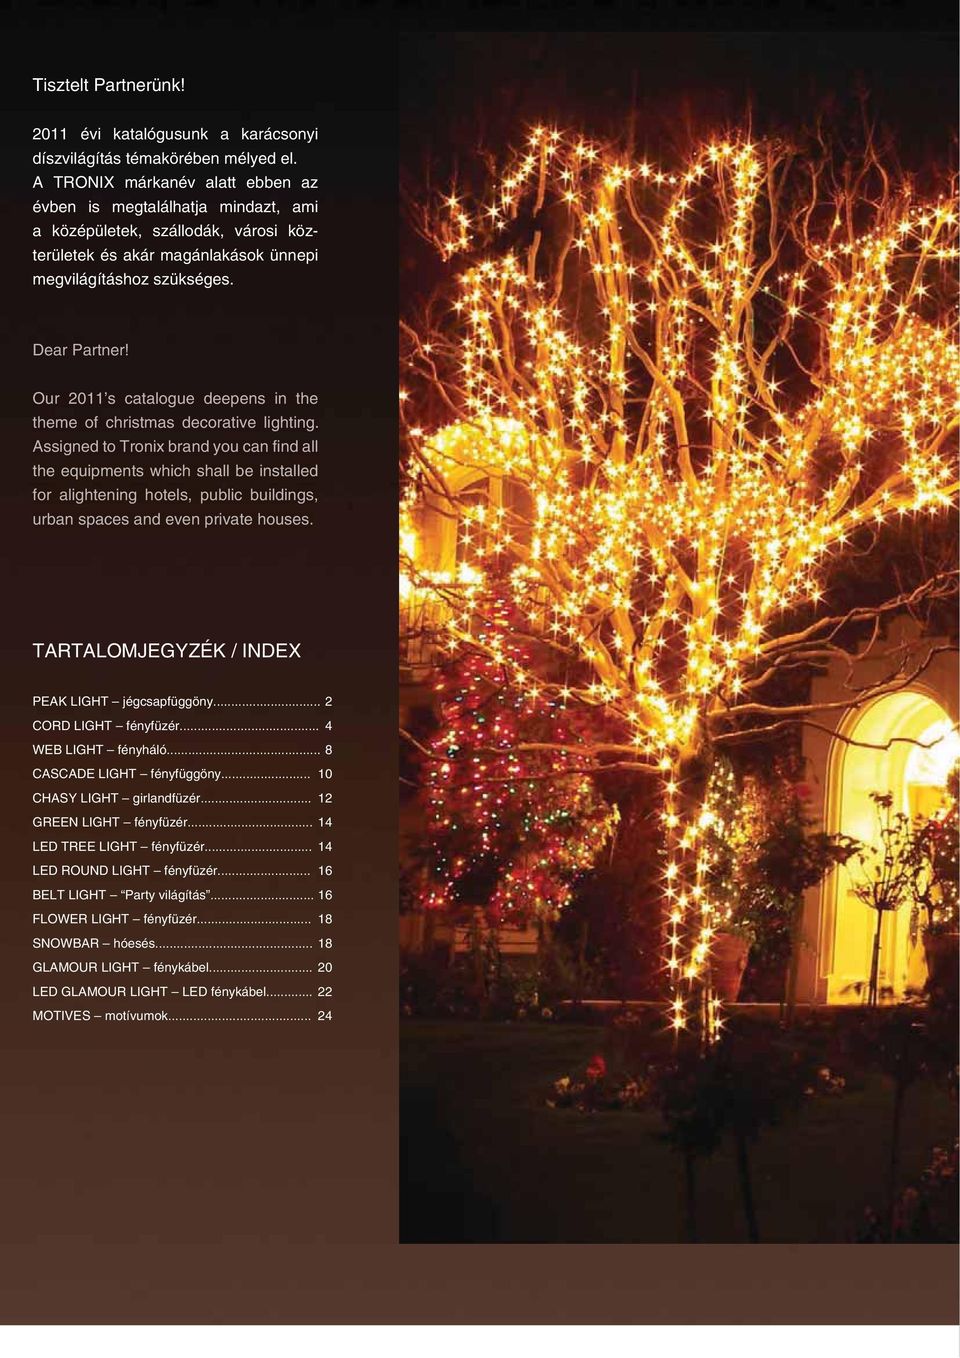 Our 2011 s catalogue deepens in the theme of christmas decorative lighting.